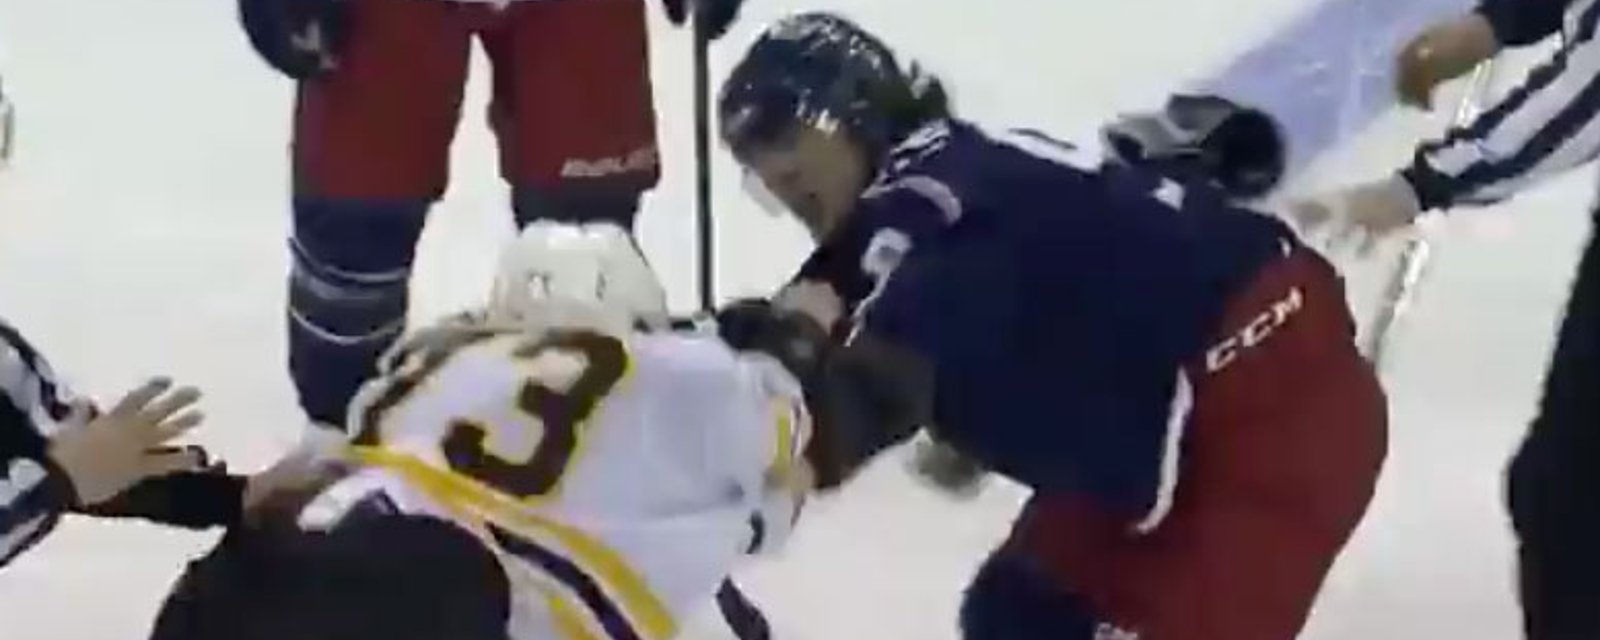 Breaking: Panarin drops the gloves on McAvoy in heated fight! 